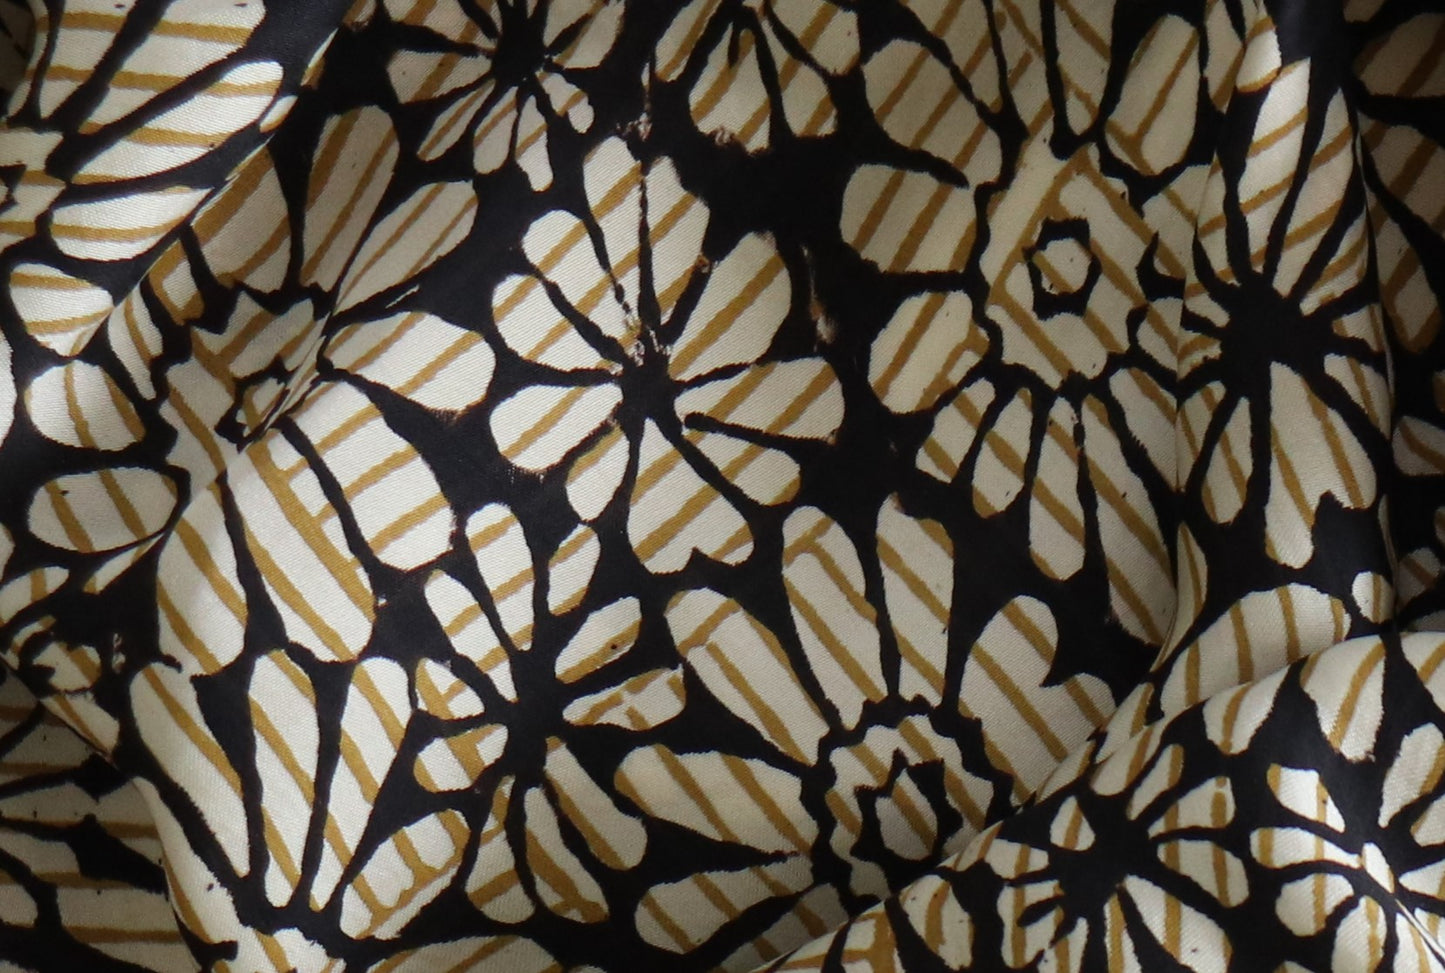 Dyed and printed fabric